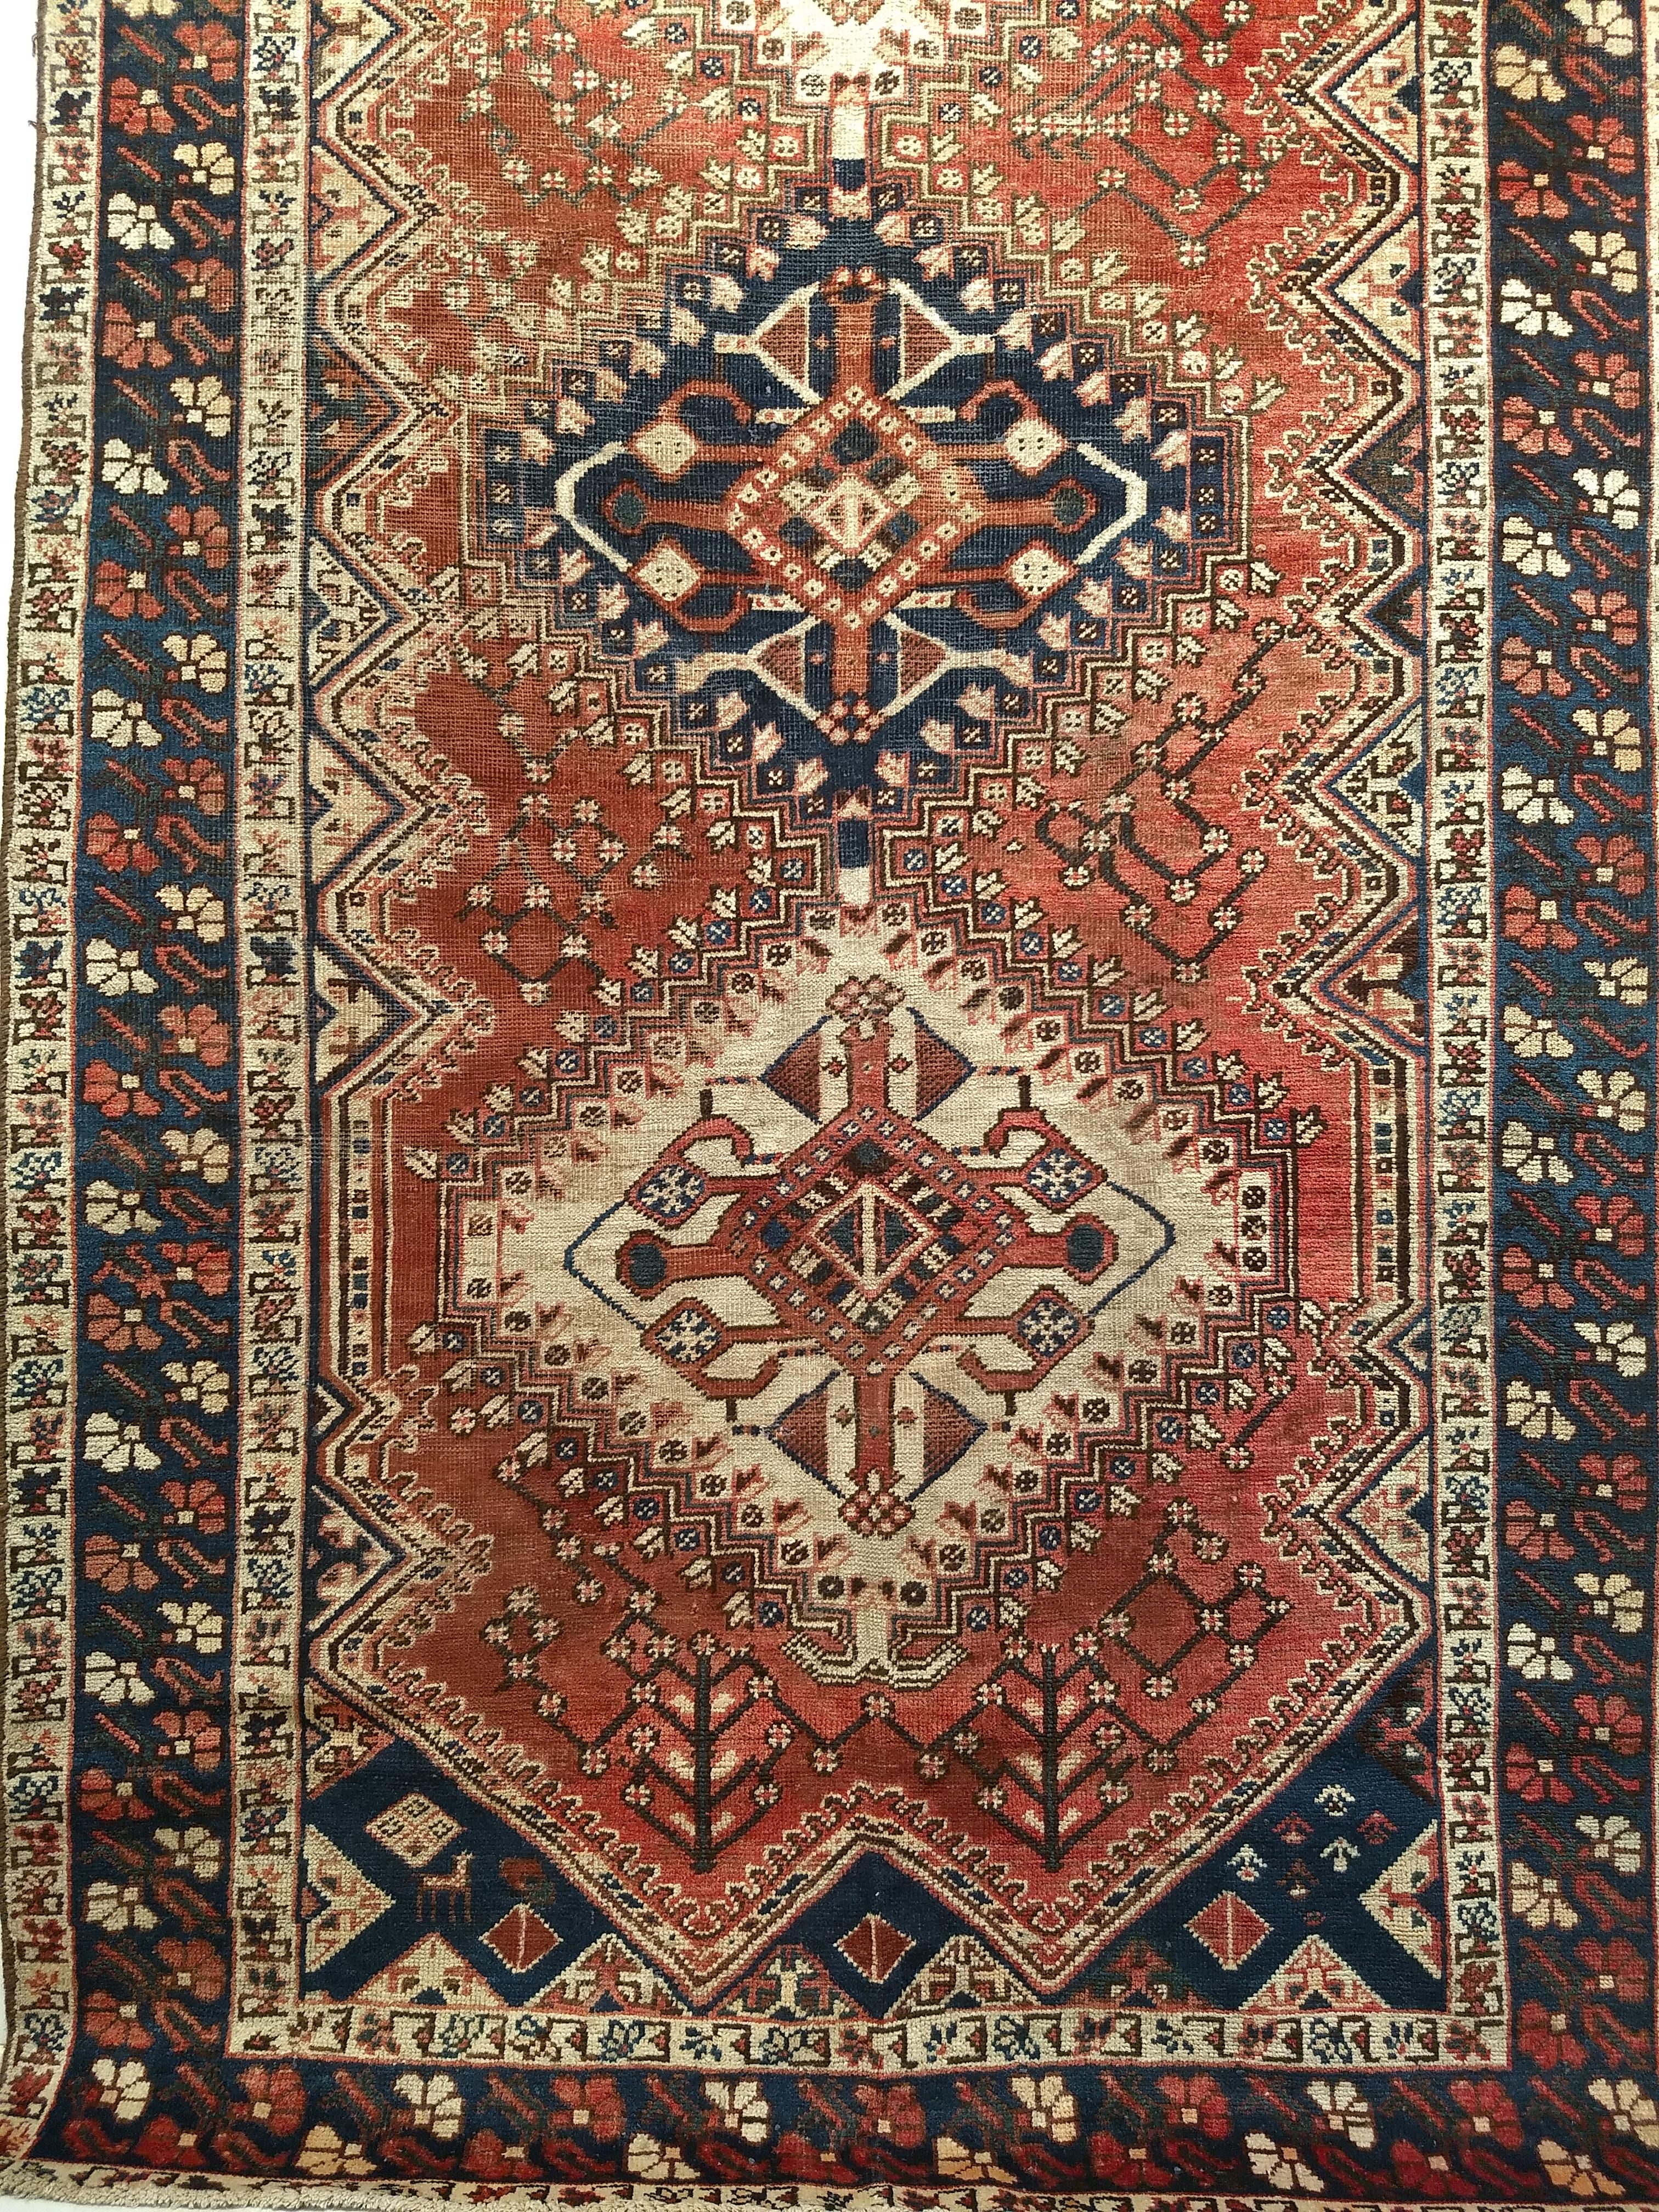 Vintage Persian Shiraz Tribal Area Rug in Rust Red, Ivory, Blue In Good Condition For Sale In Barrington, IL